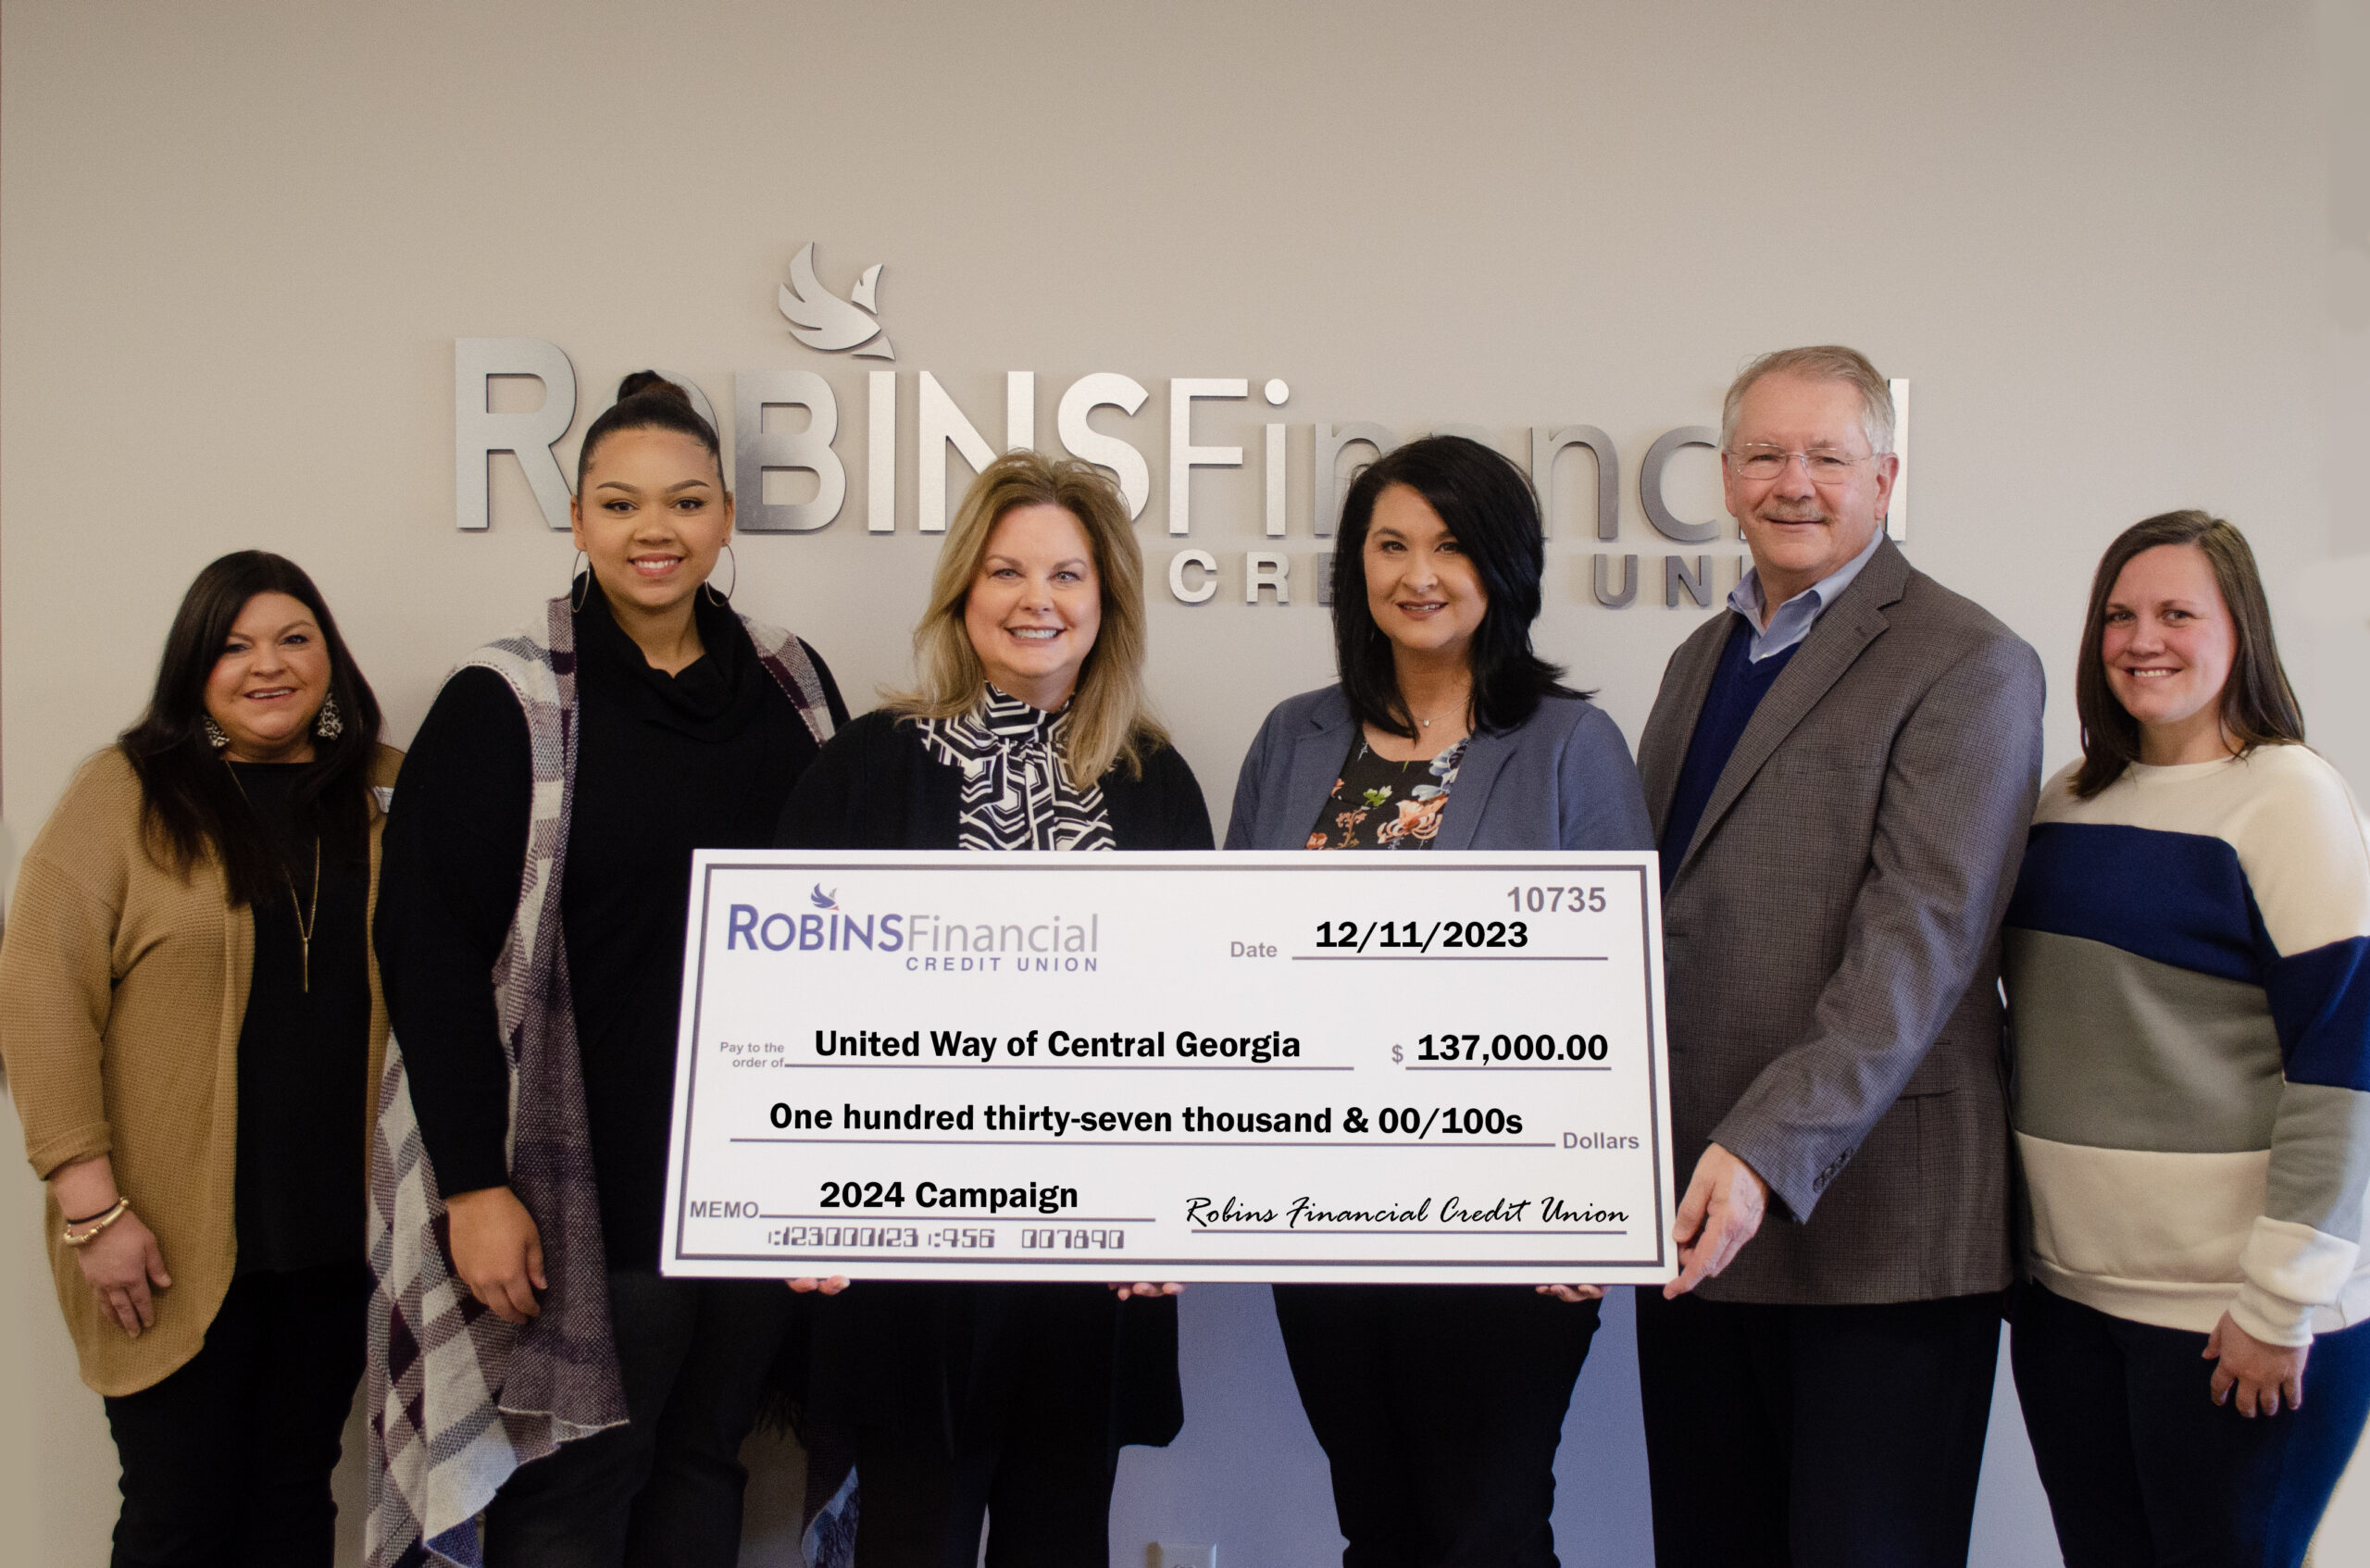 Robins Financial Credit Union Raises $137,000 to Support United Way of Central Georgia